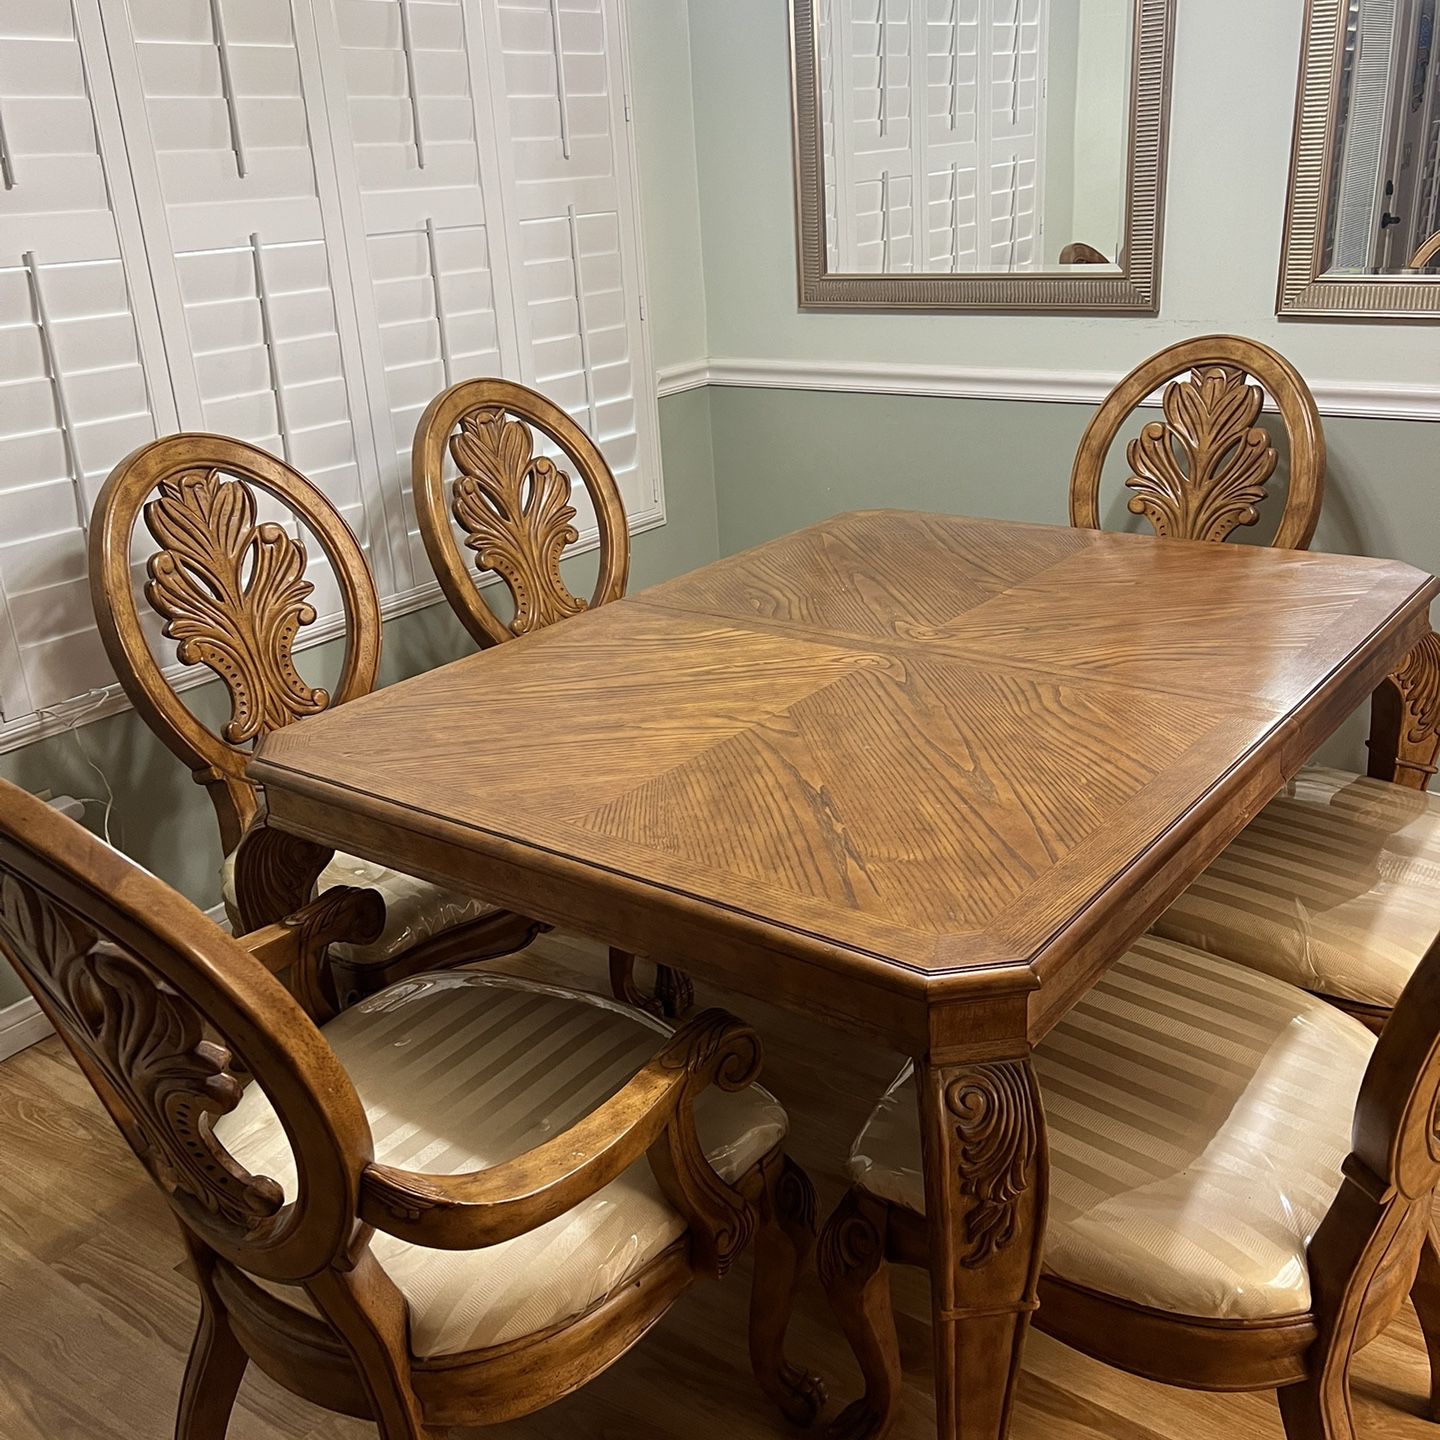 Dining room set, medium oak color, six chairs and center leaf